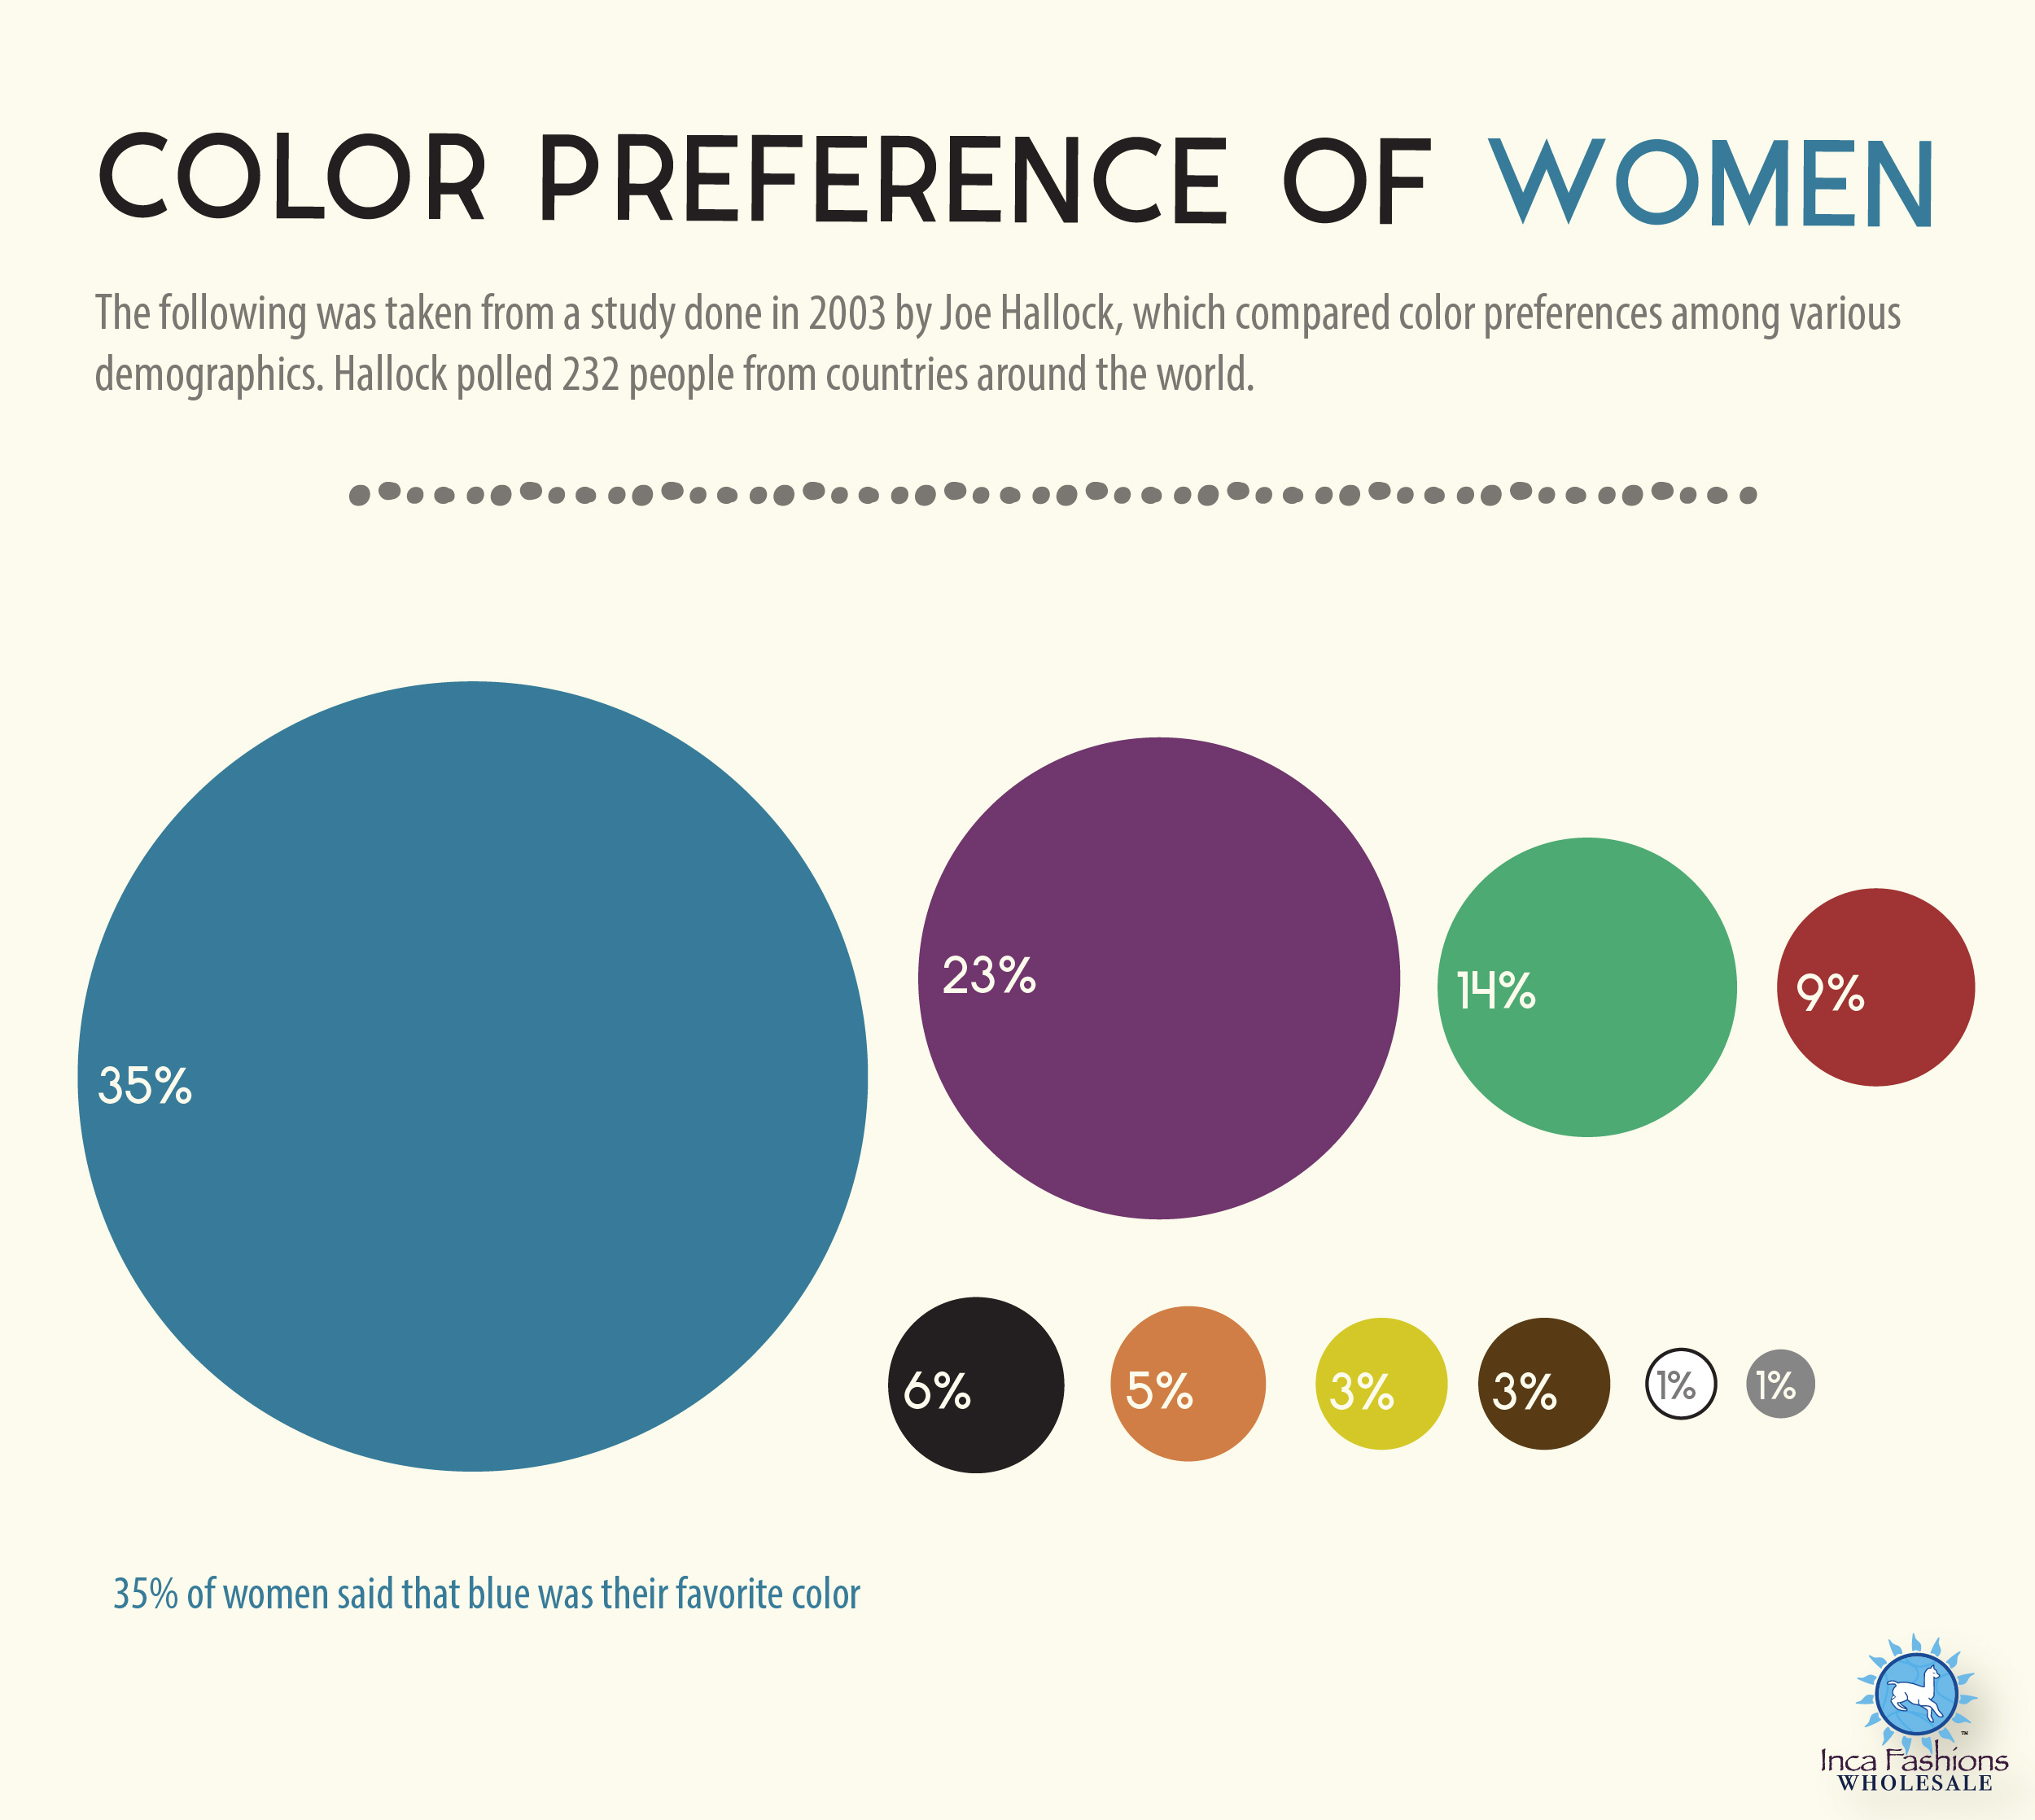 color-preference-of-women.jpg